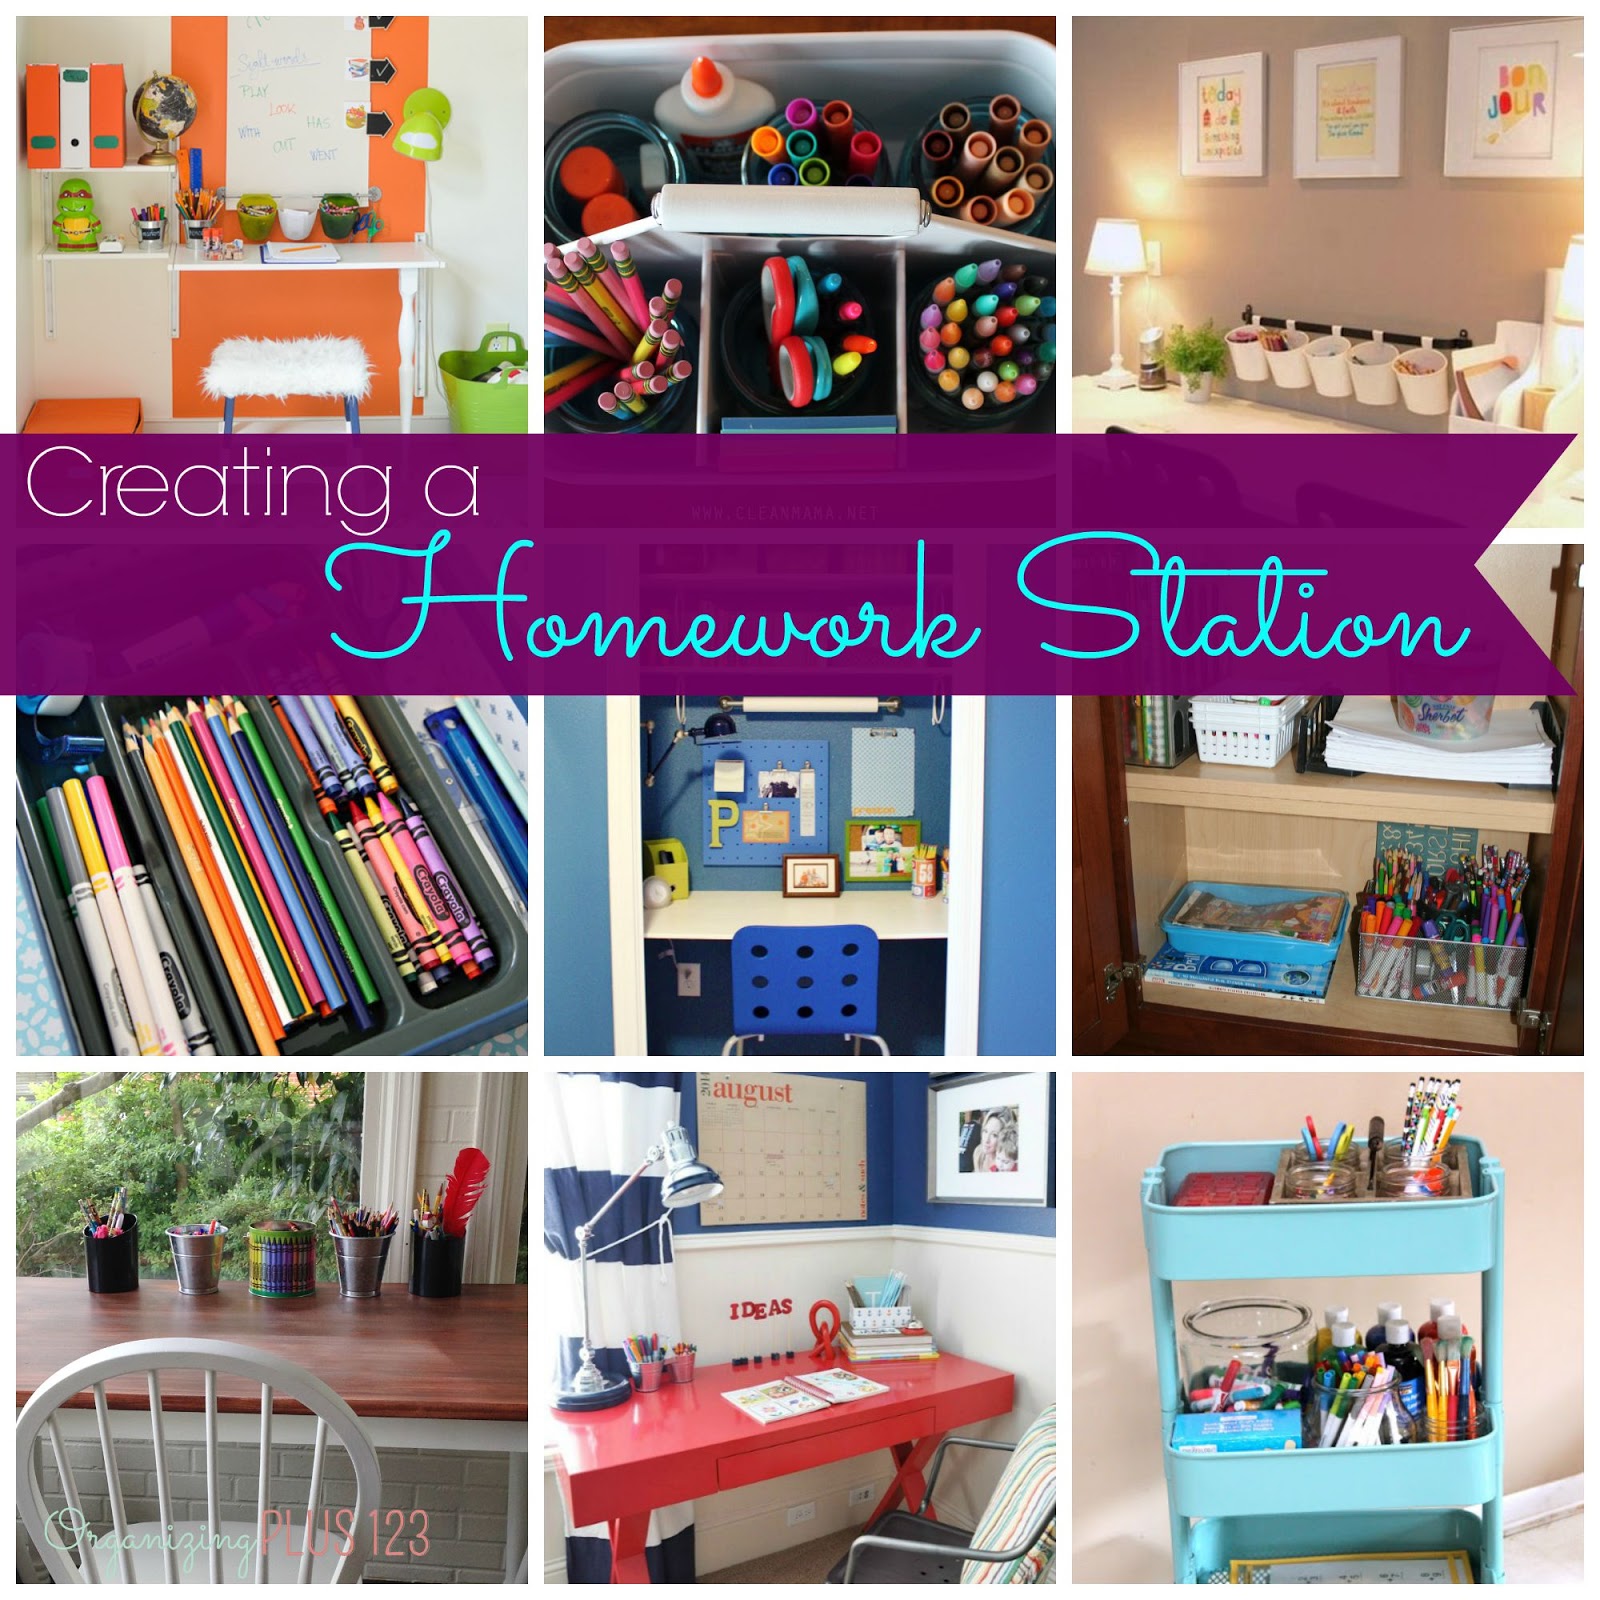 Organizing Plus 123: Back-to-School Series: Creating a Homework Station